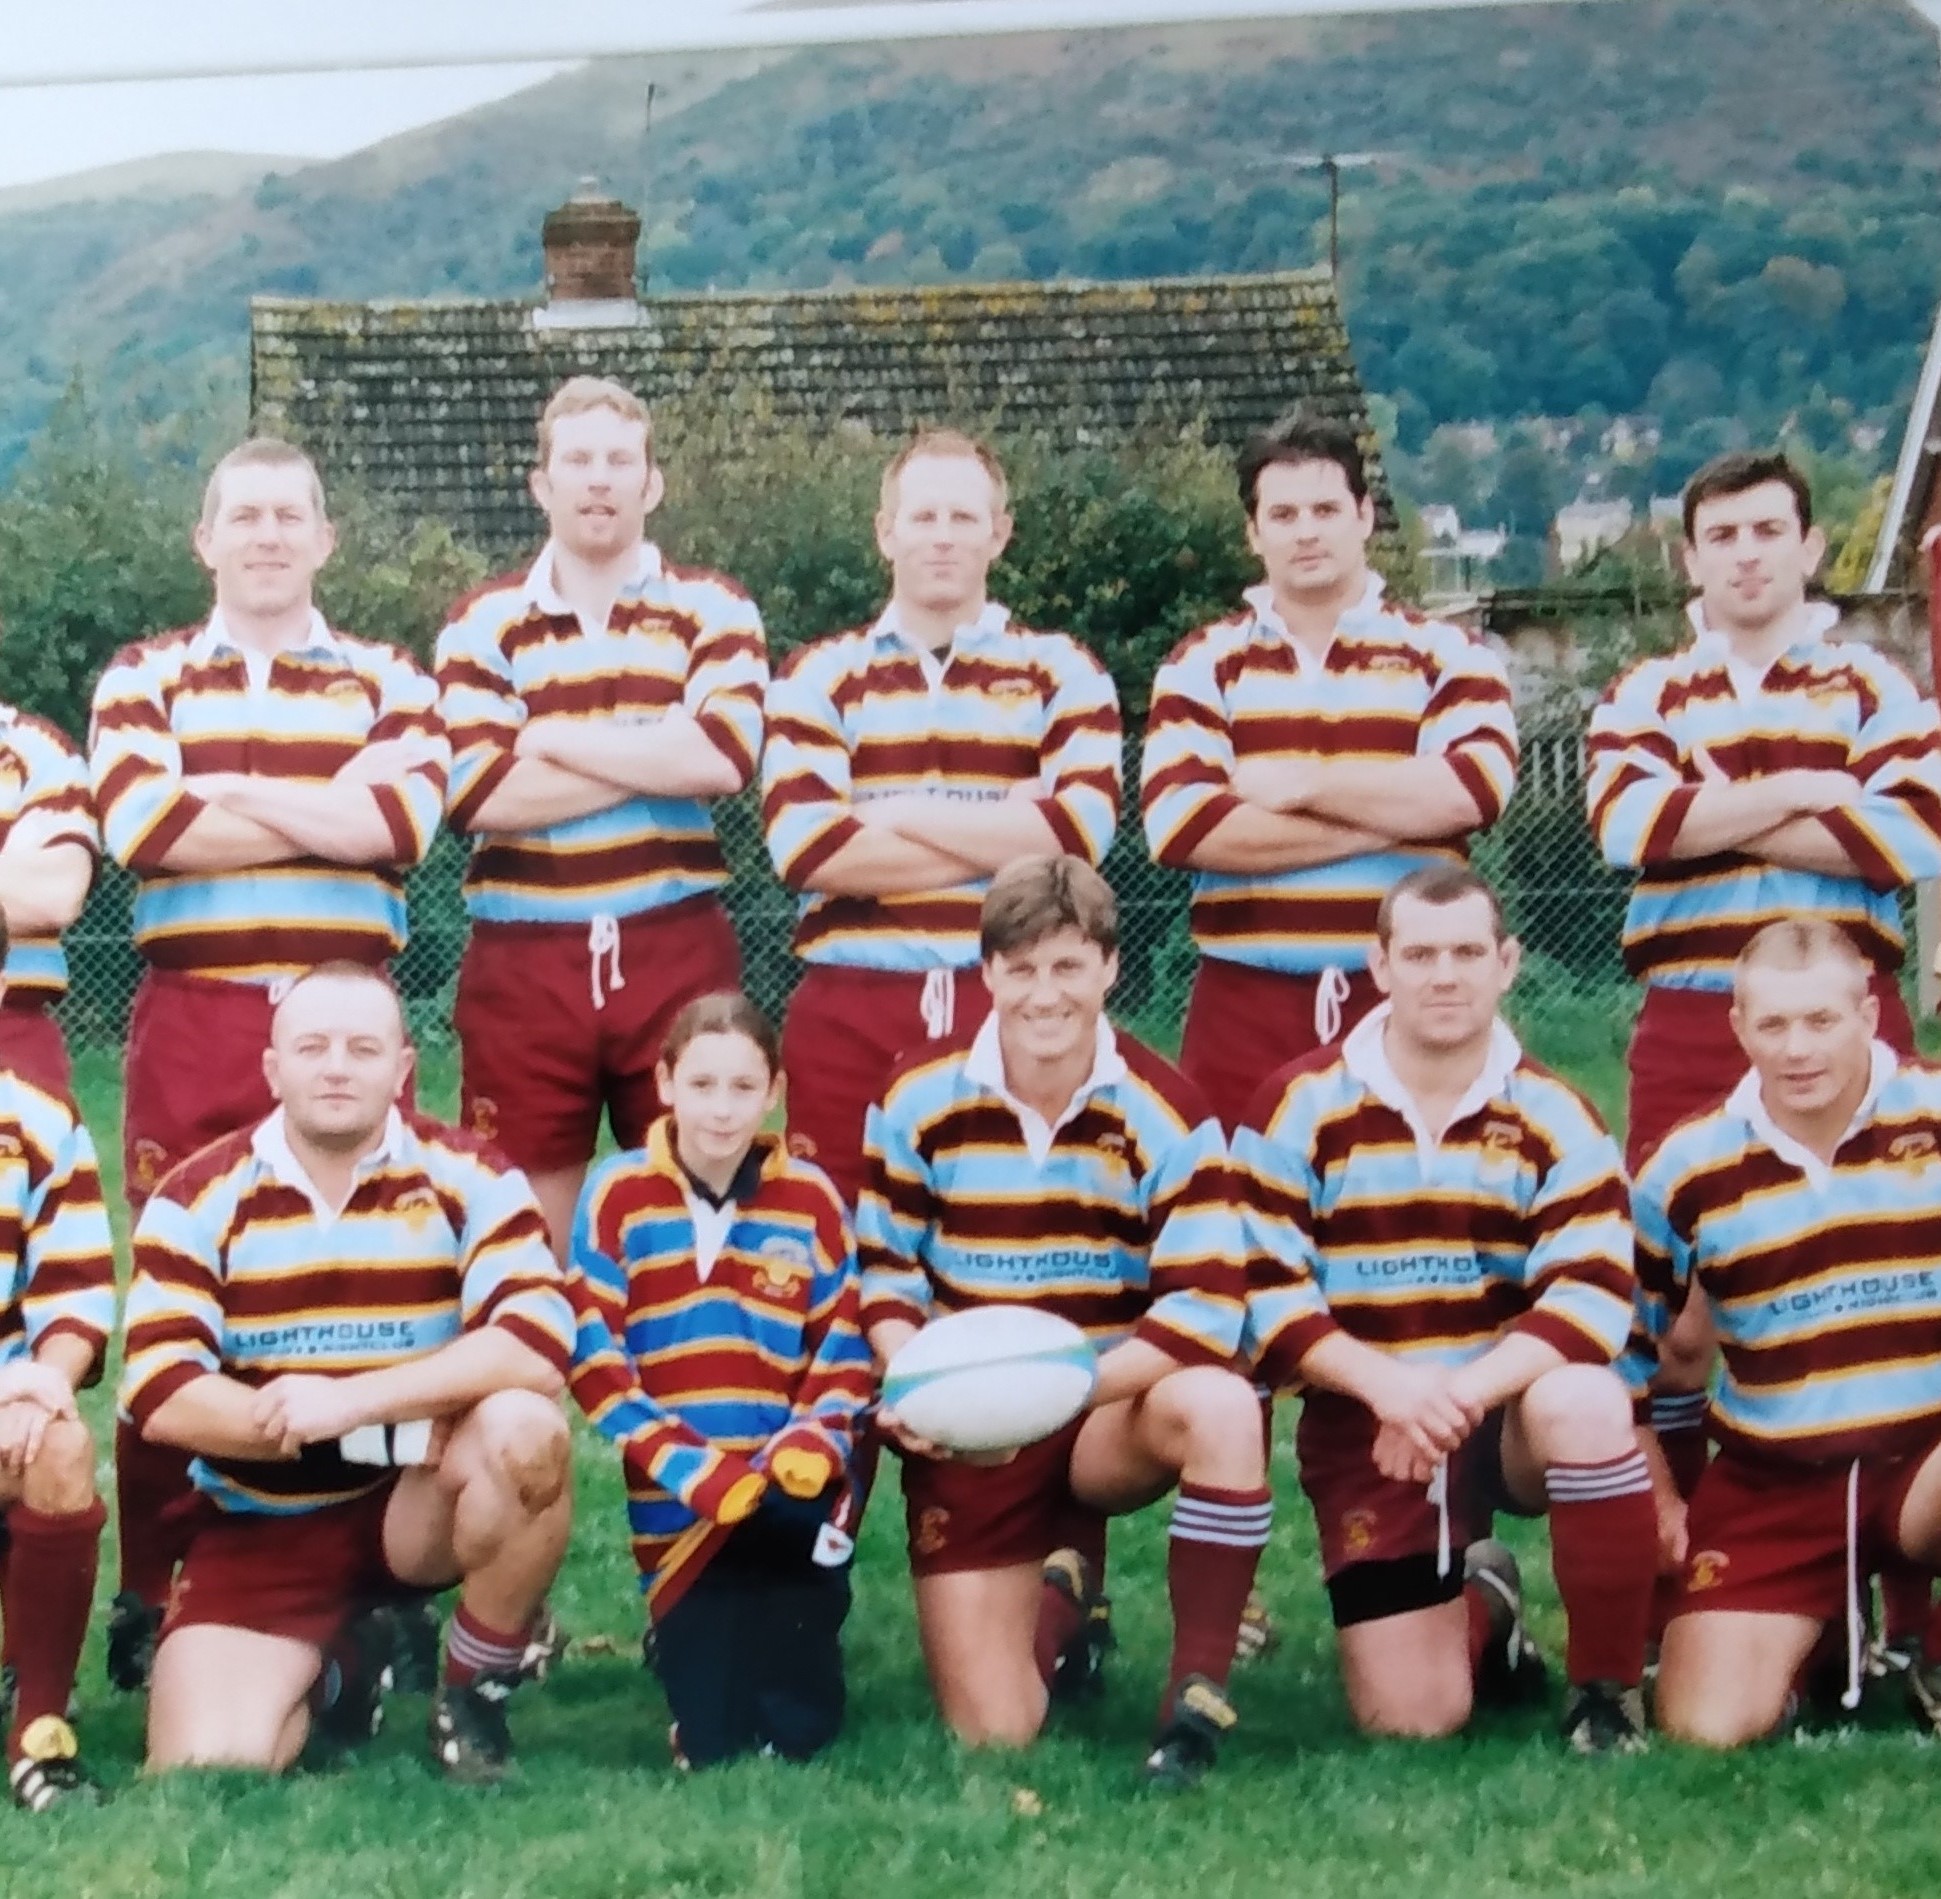 The Malvern RFC 1st XV rugby squad pictured in October 2000, complete with mascot Kerris Levin. Did you pack down against the team? What are the players doing now? Might some still be playing veterans rugby? We’d love to hear from anyone involved